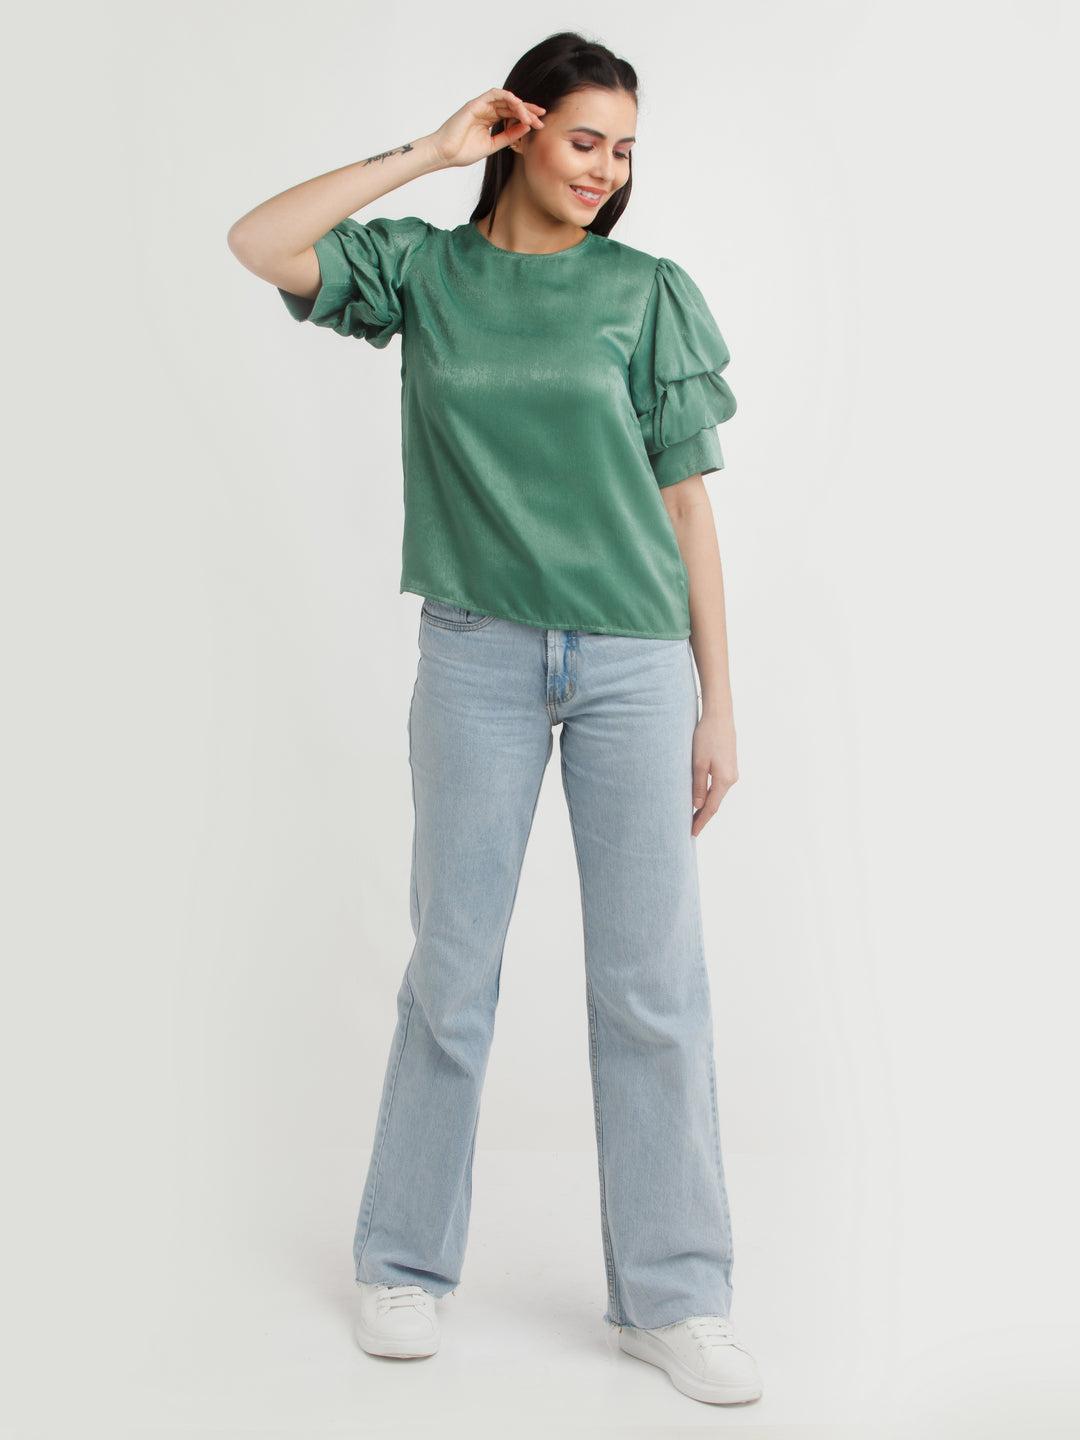 green-solid-top-for-women